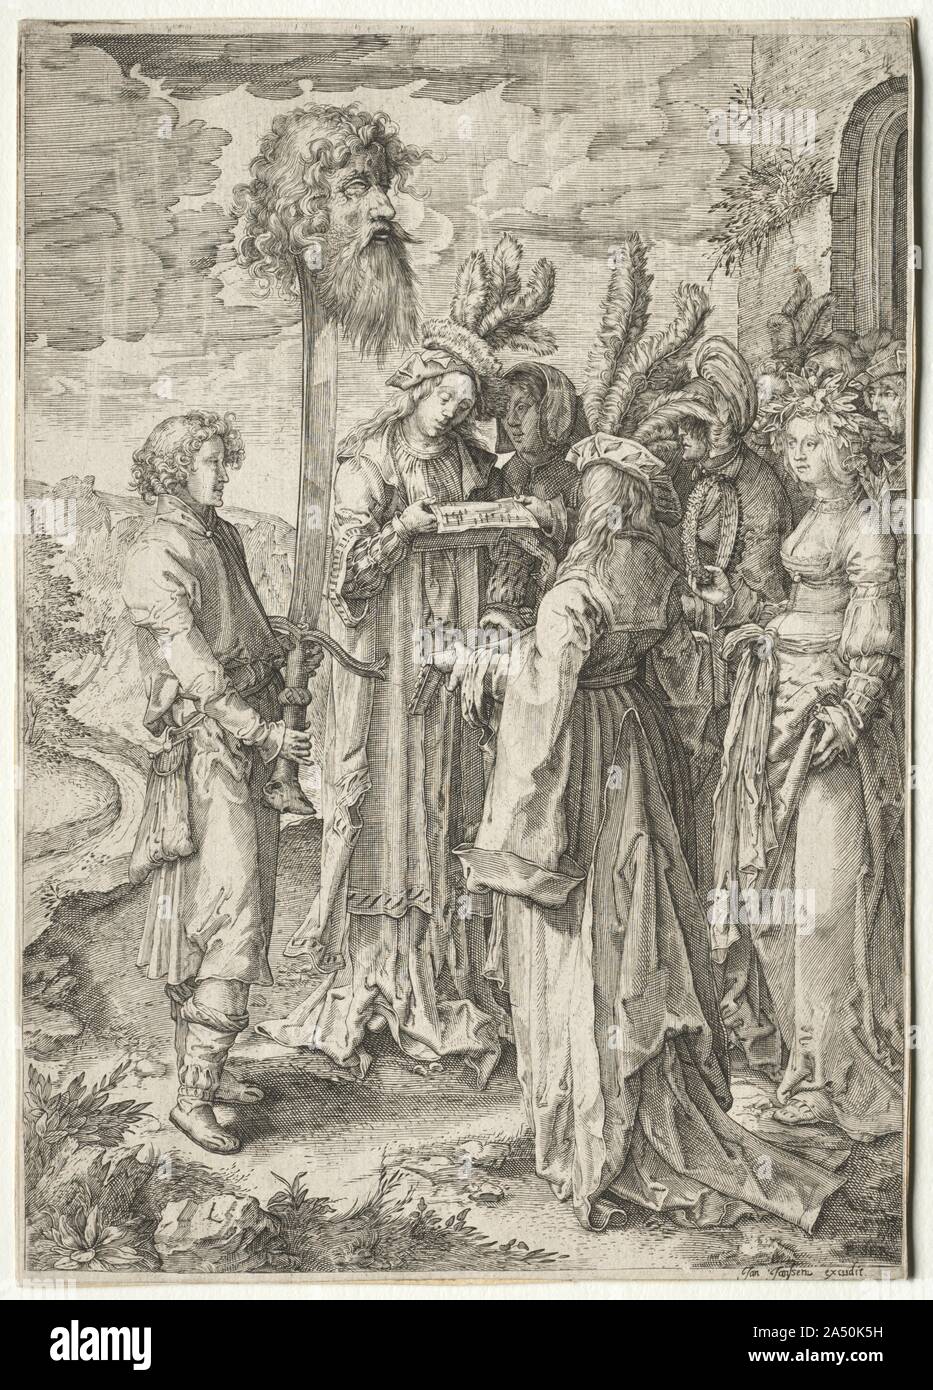 David with the Head of Goliath, 1620s-1630s. Here, a hymn of praise is sung to the victorious shepherd David, who holds the head of Goliath impaled on a large sword. The life of King David, as relayed in the Old Testament, was intrinsically linked with music. According to the first book of Chronicles, he initiated the use of music in divine worship in his capacity as the king. Stock Photo